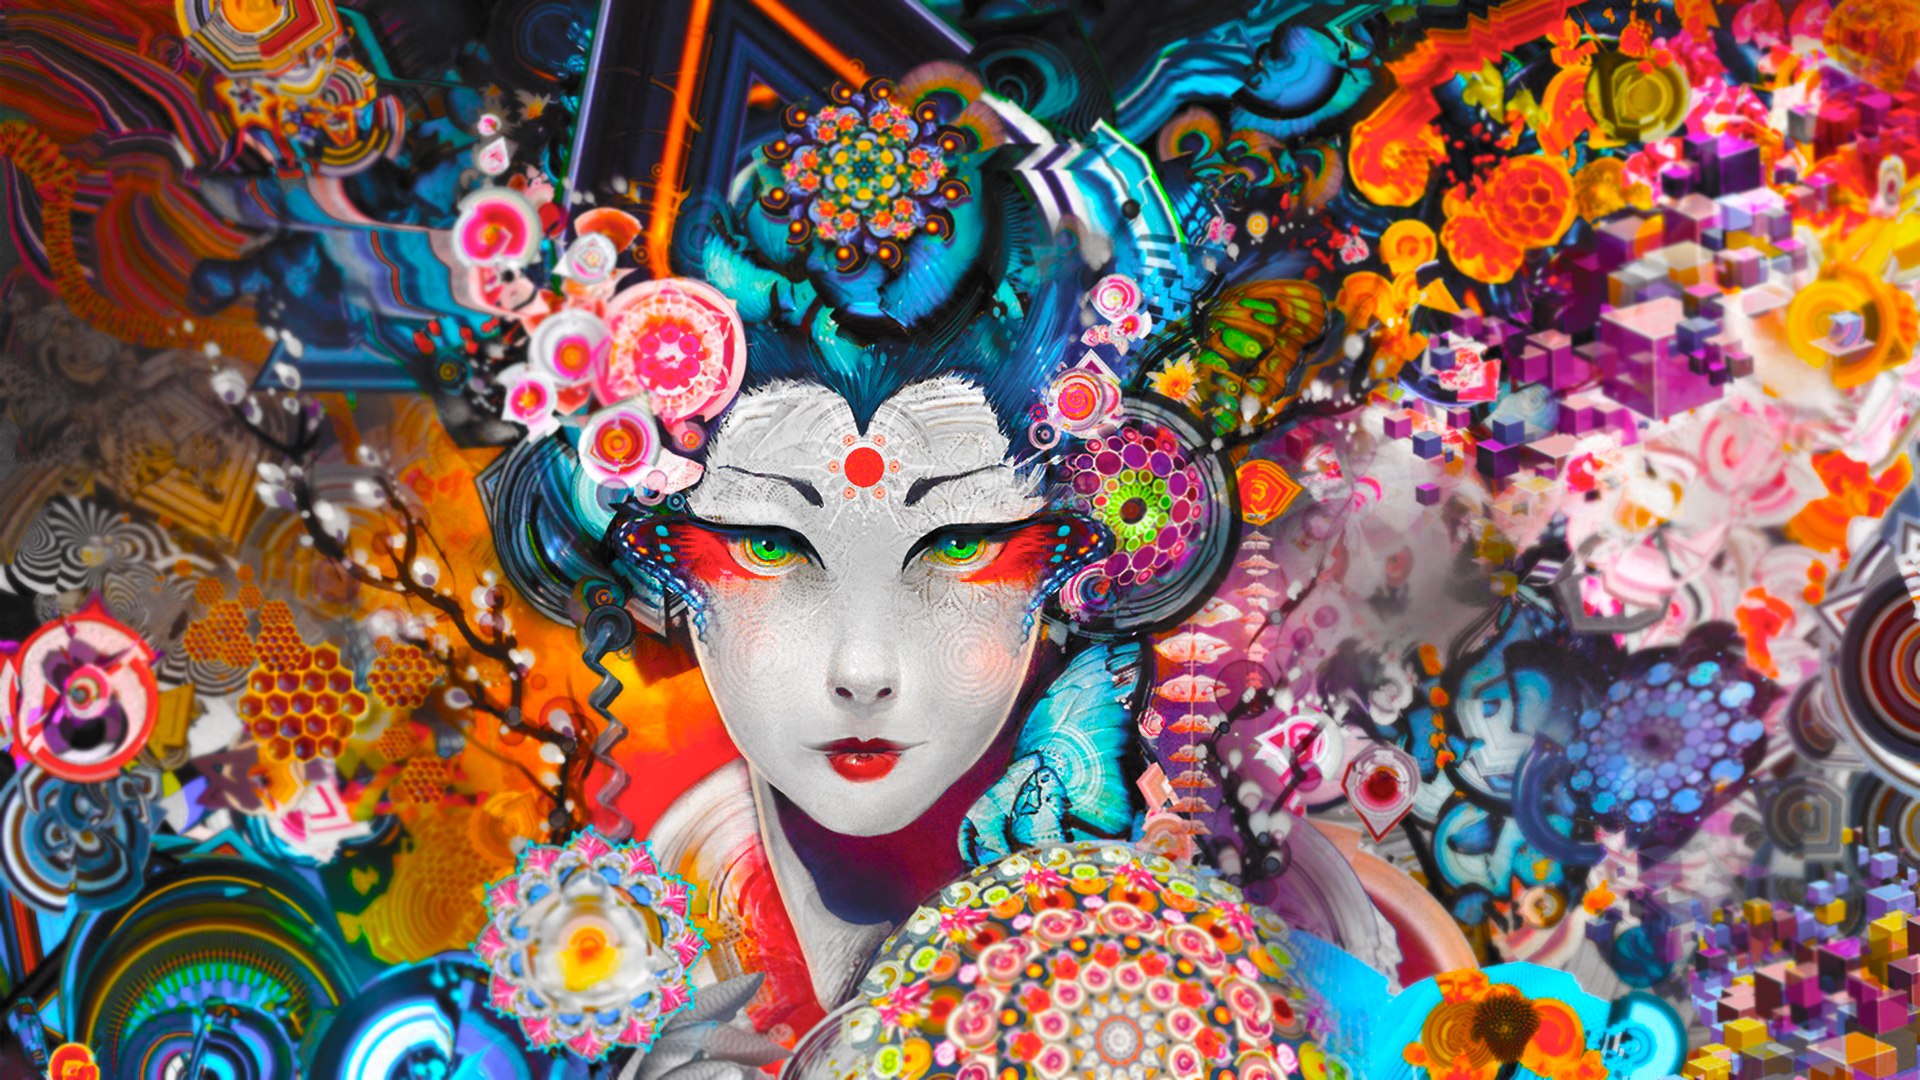 Trippy wallpaper 1920x1080 - (#31271) - High Quality and ...